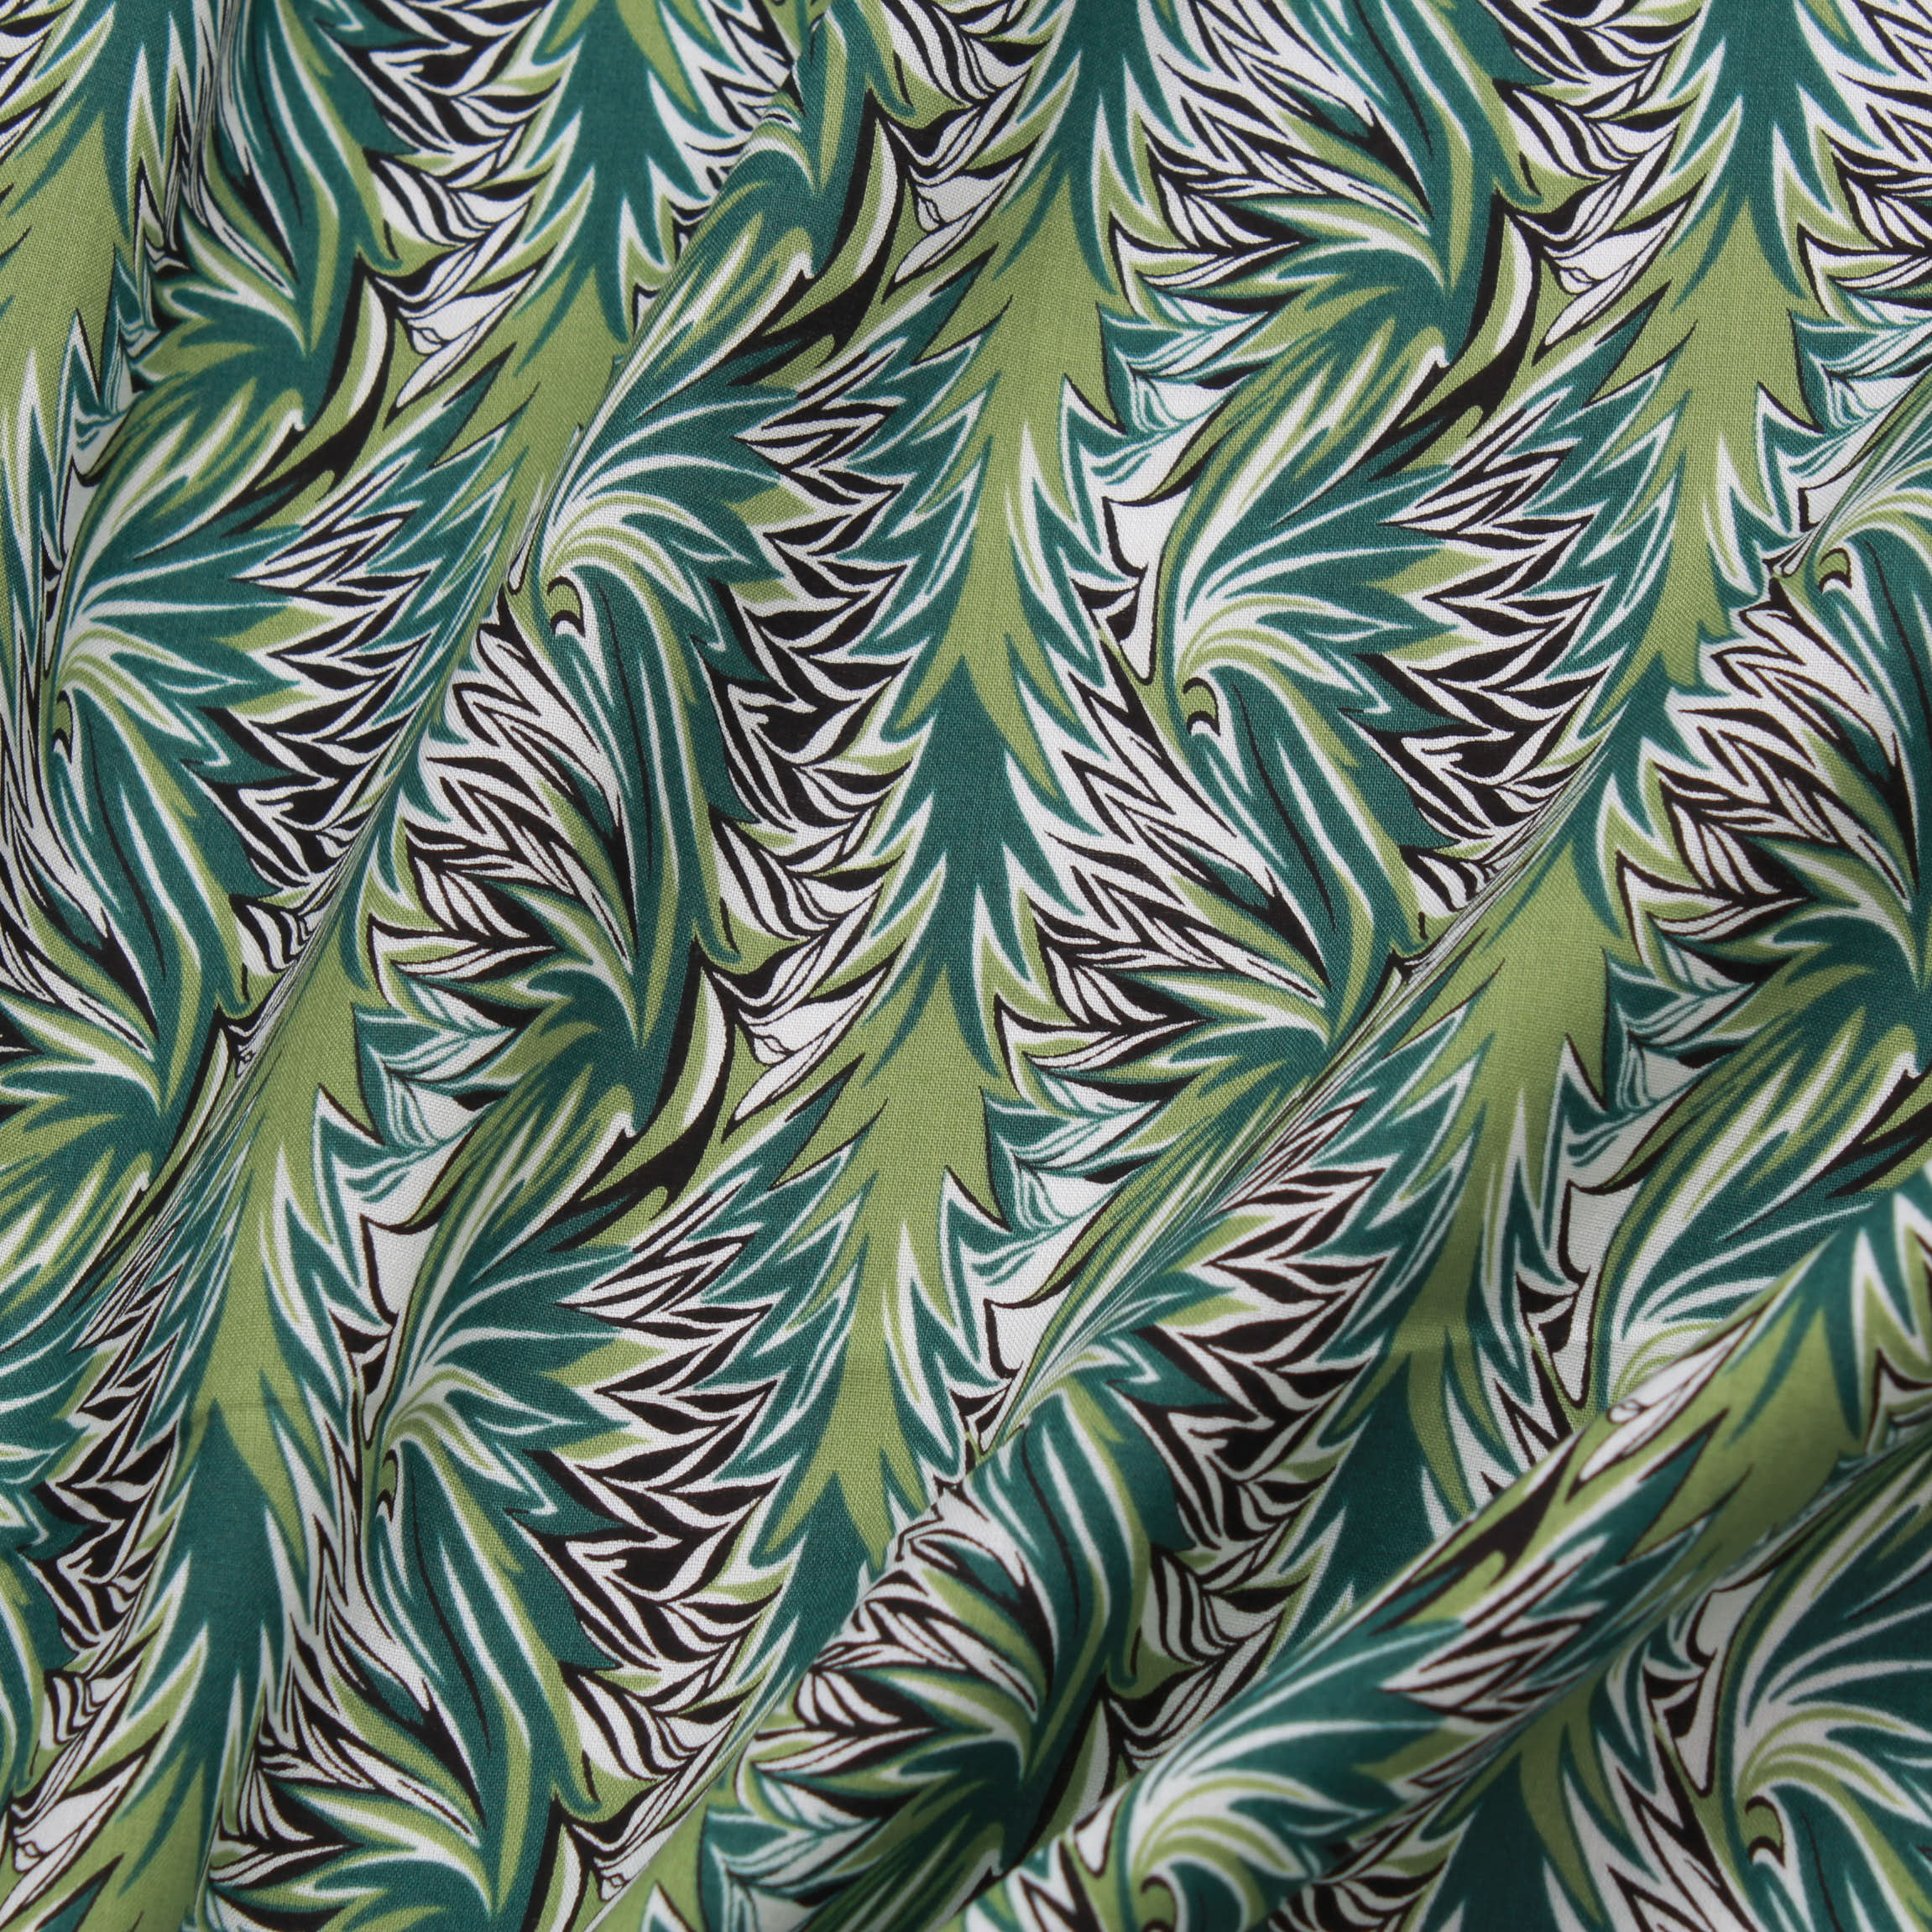 100% Cotton Lawn, 'Green Tropical Leaves', 60" Wide